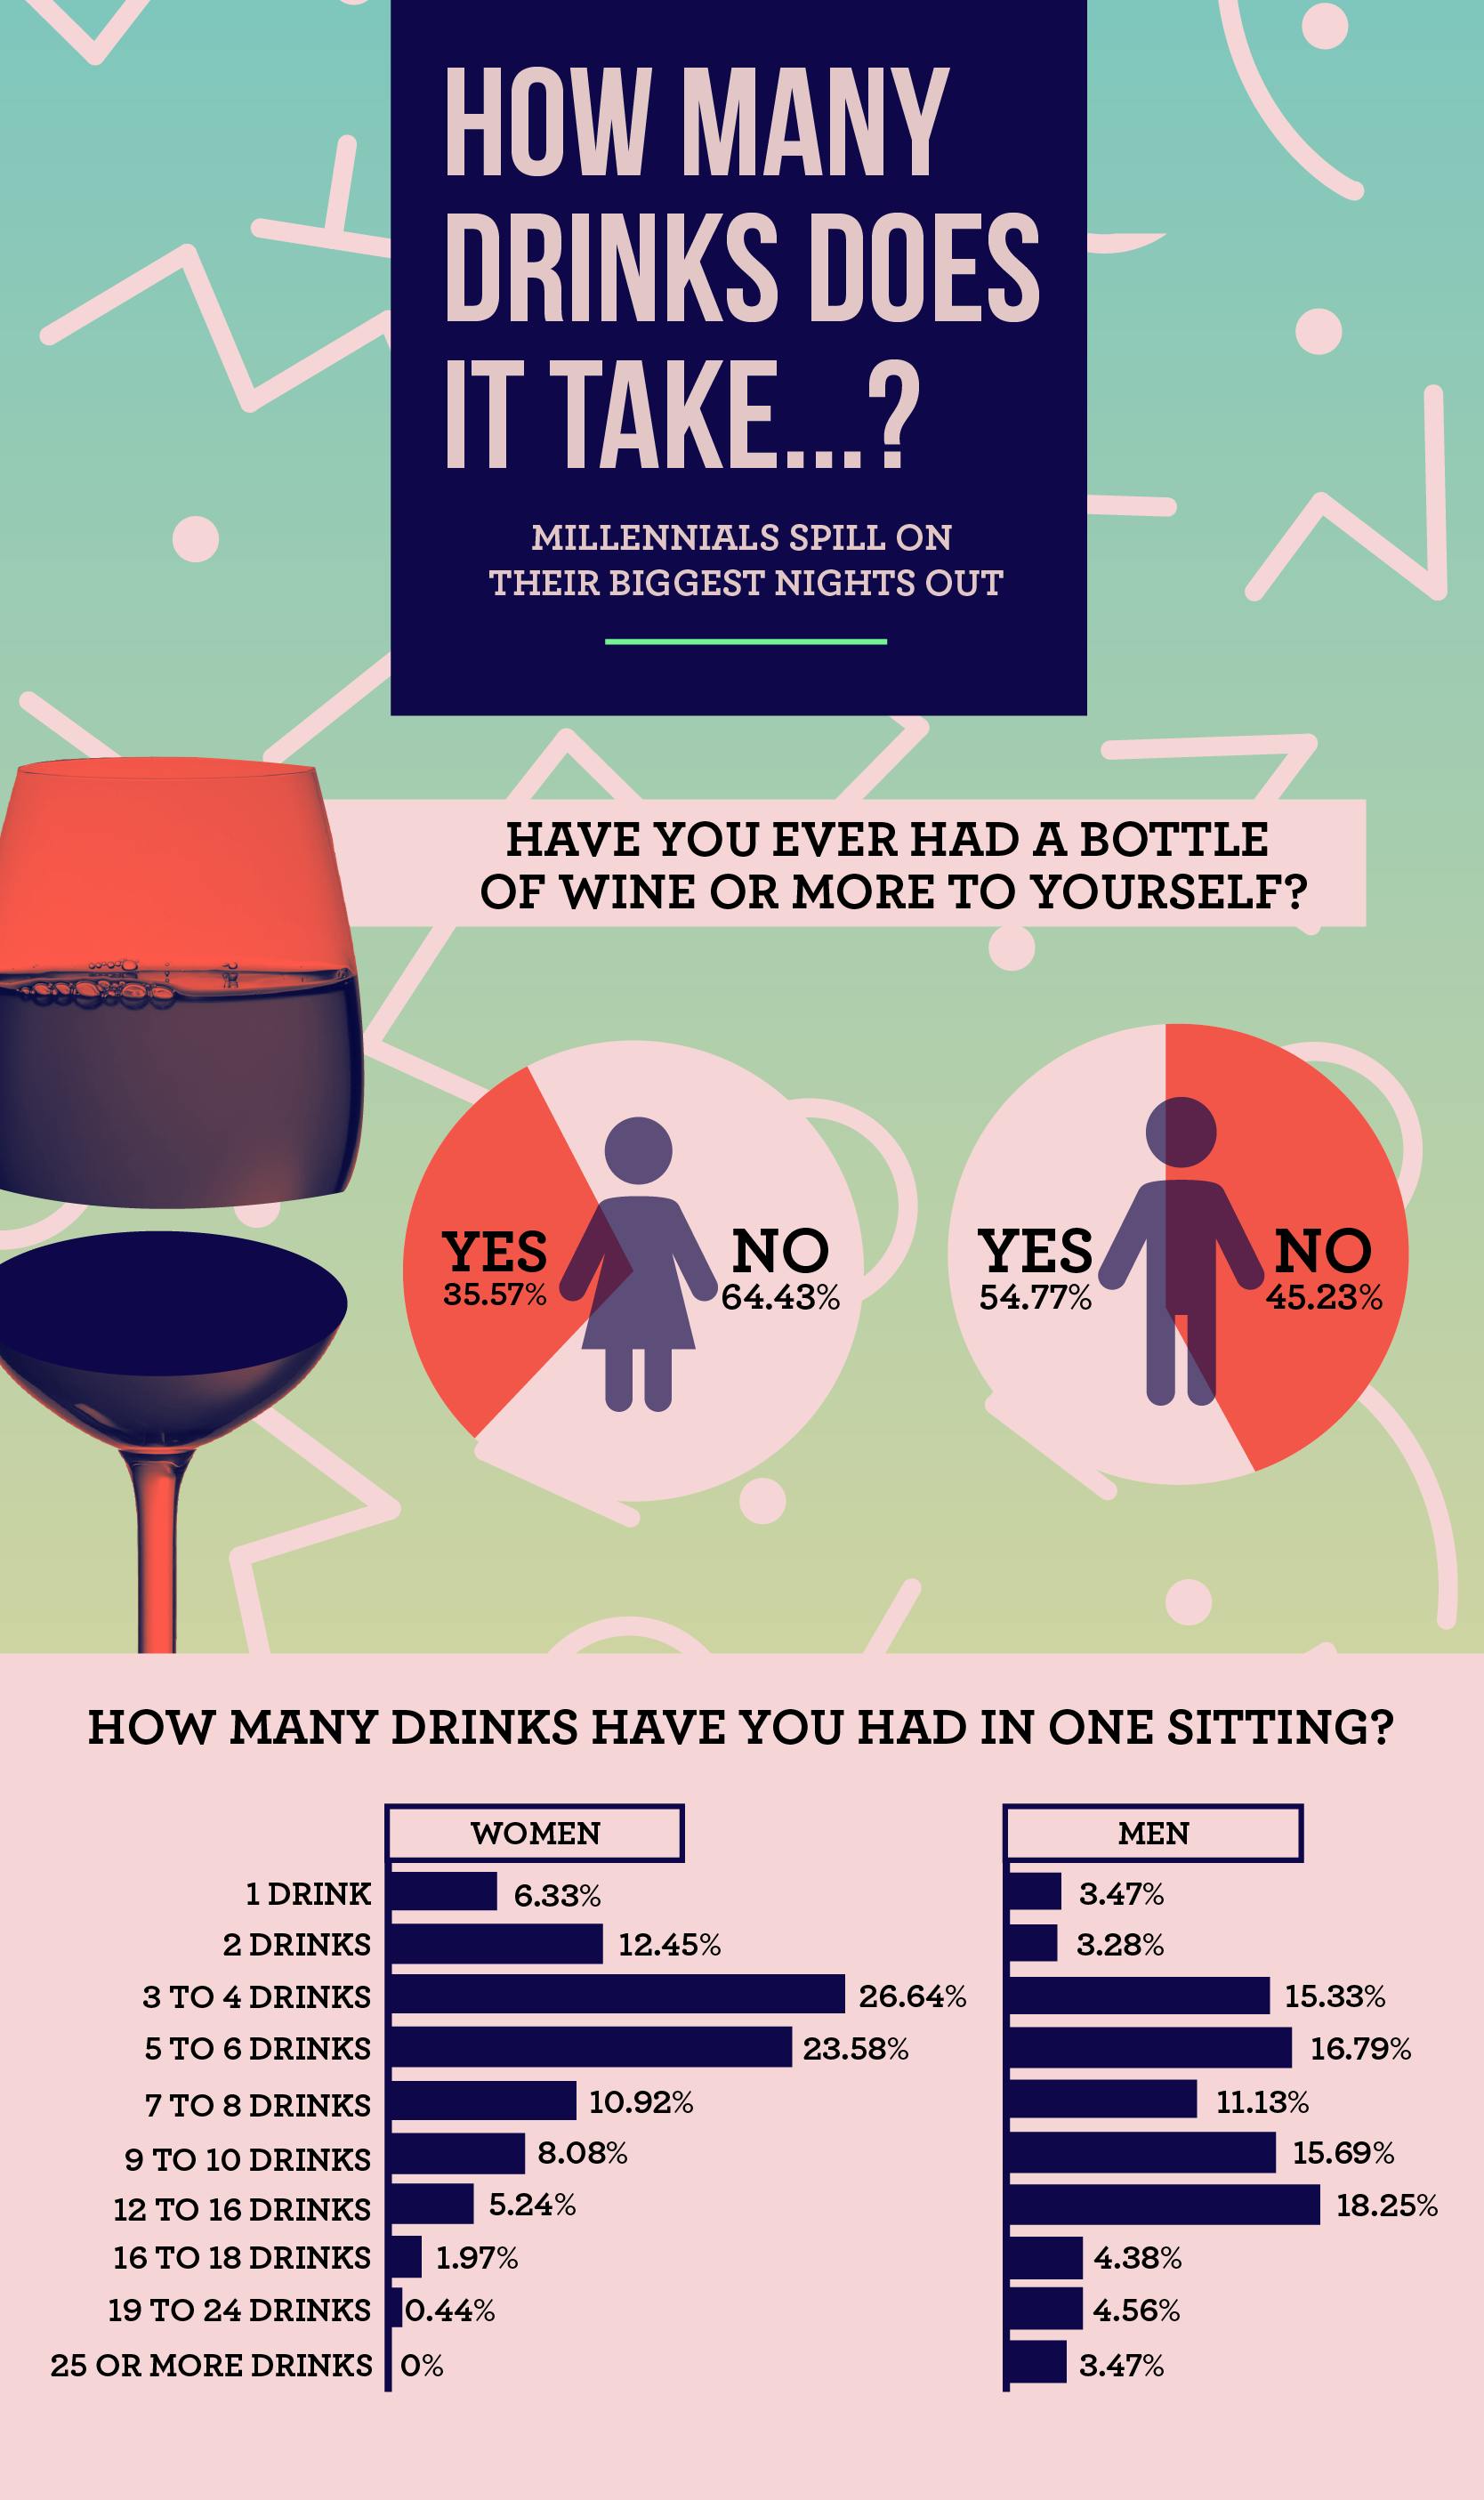 Millennial men are more likely to finish a bottle of wine by themselves than women.